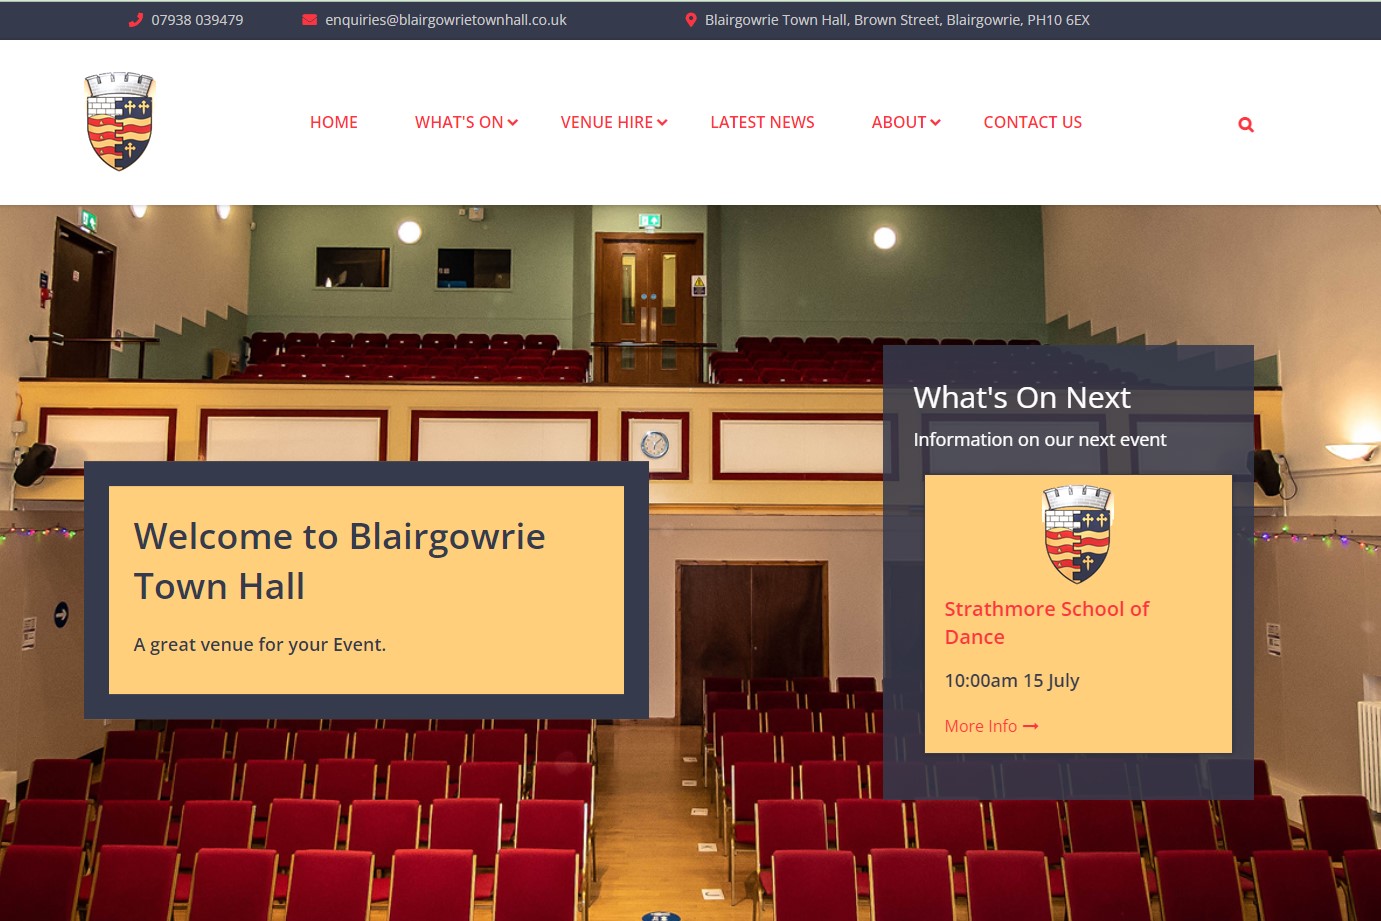 A new Website for Blairgowrie Town Hall